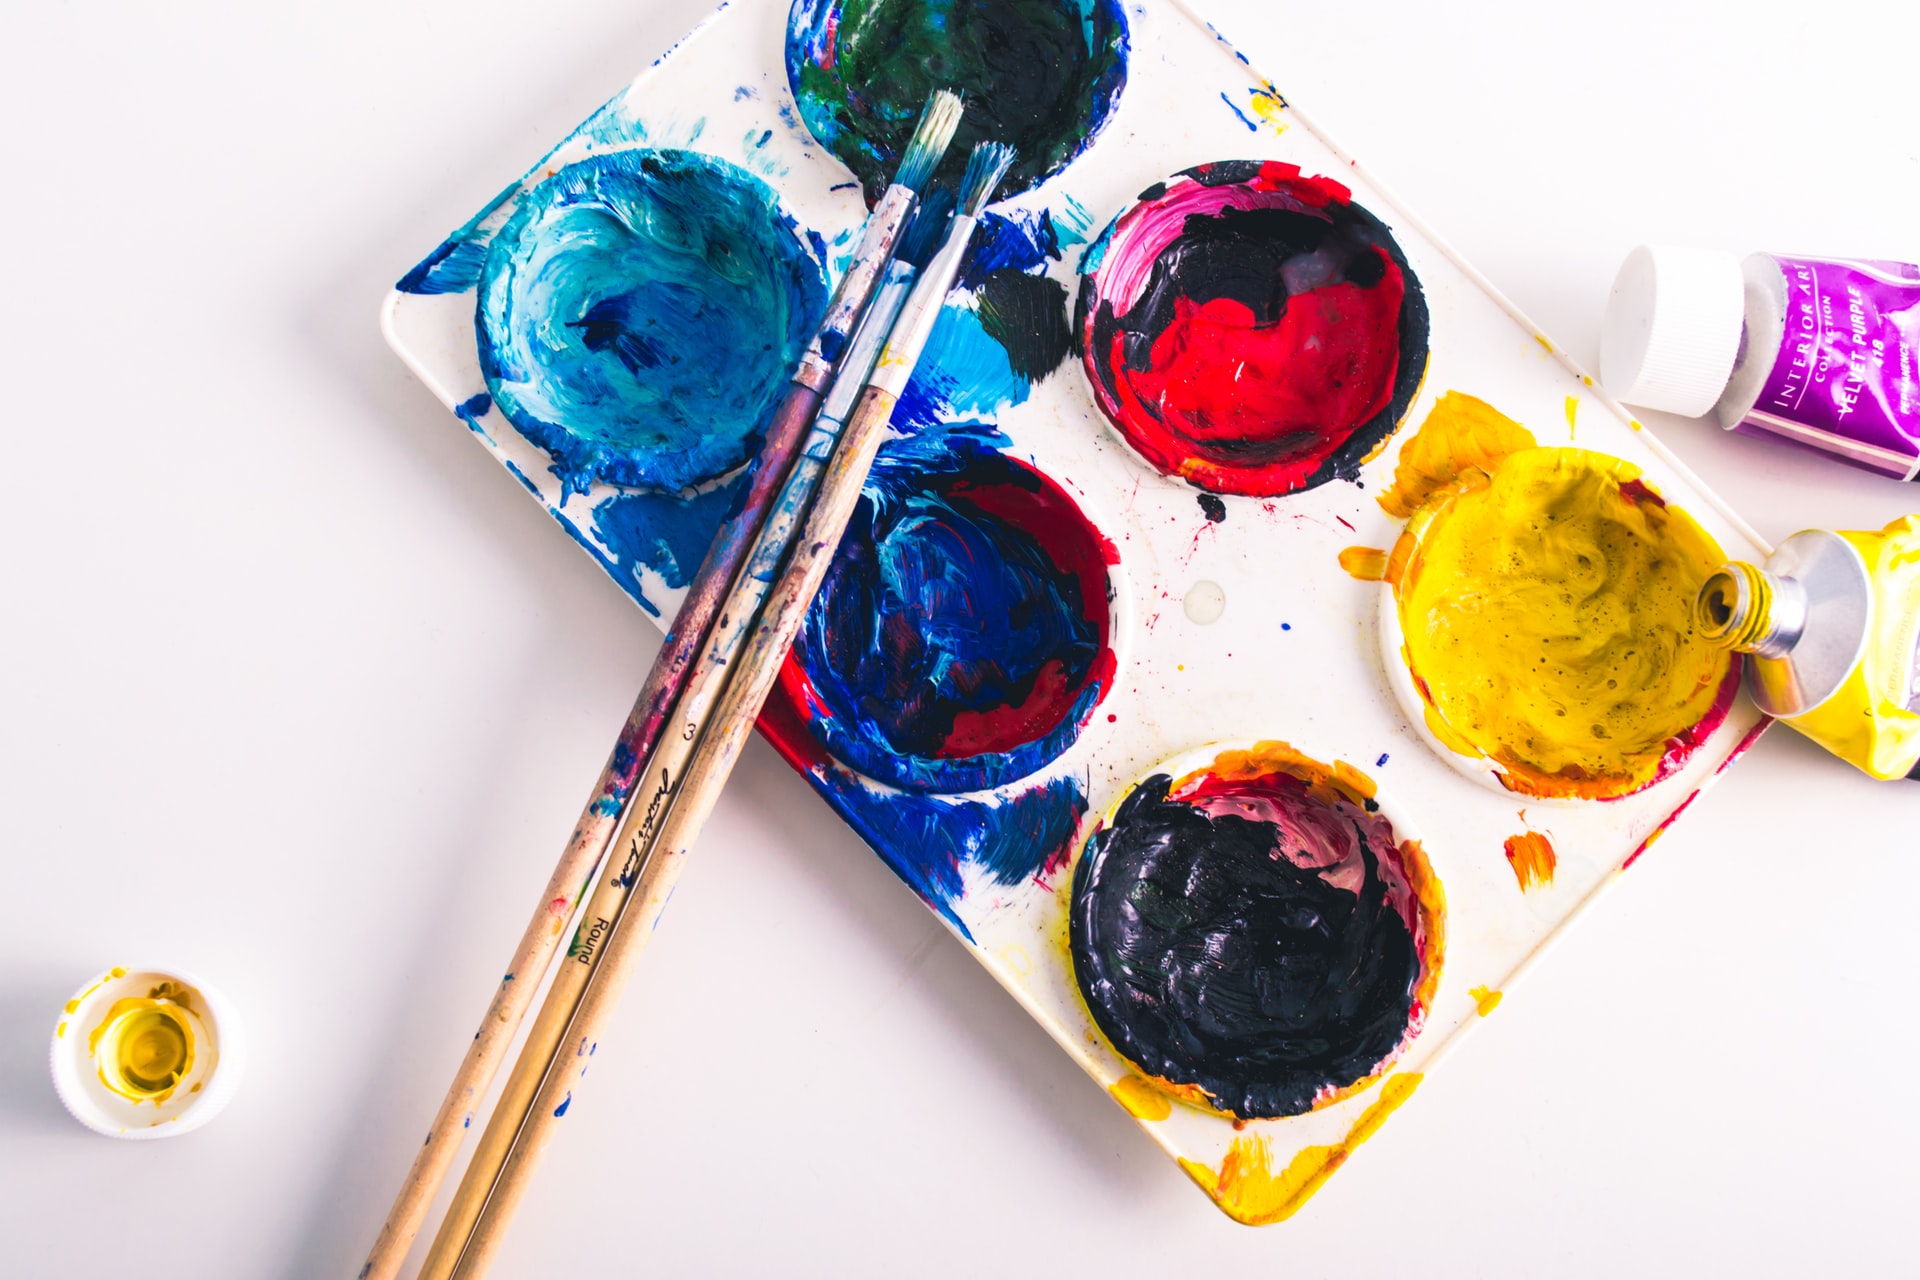 A messy paint palette and paintbrushes. Art can be an accessible hobby for chronically ill people.